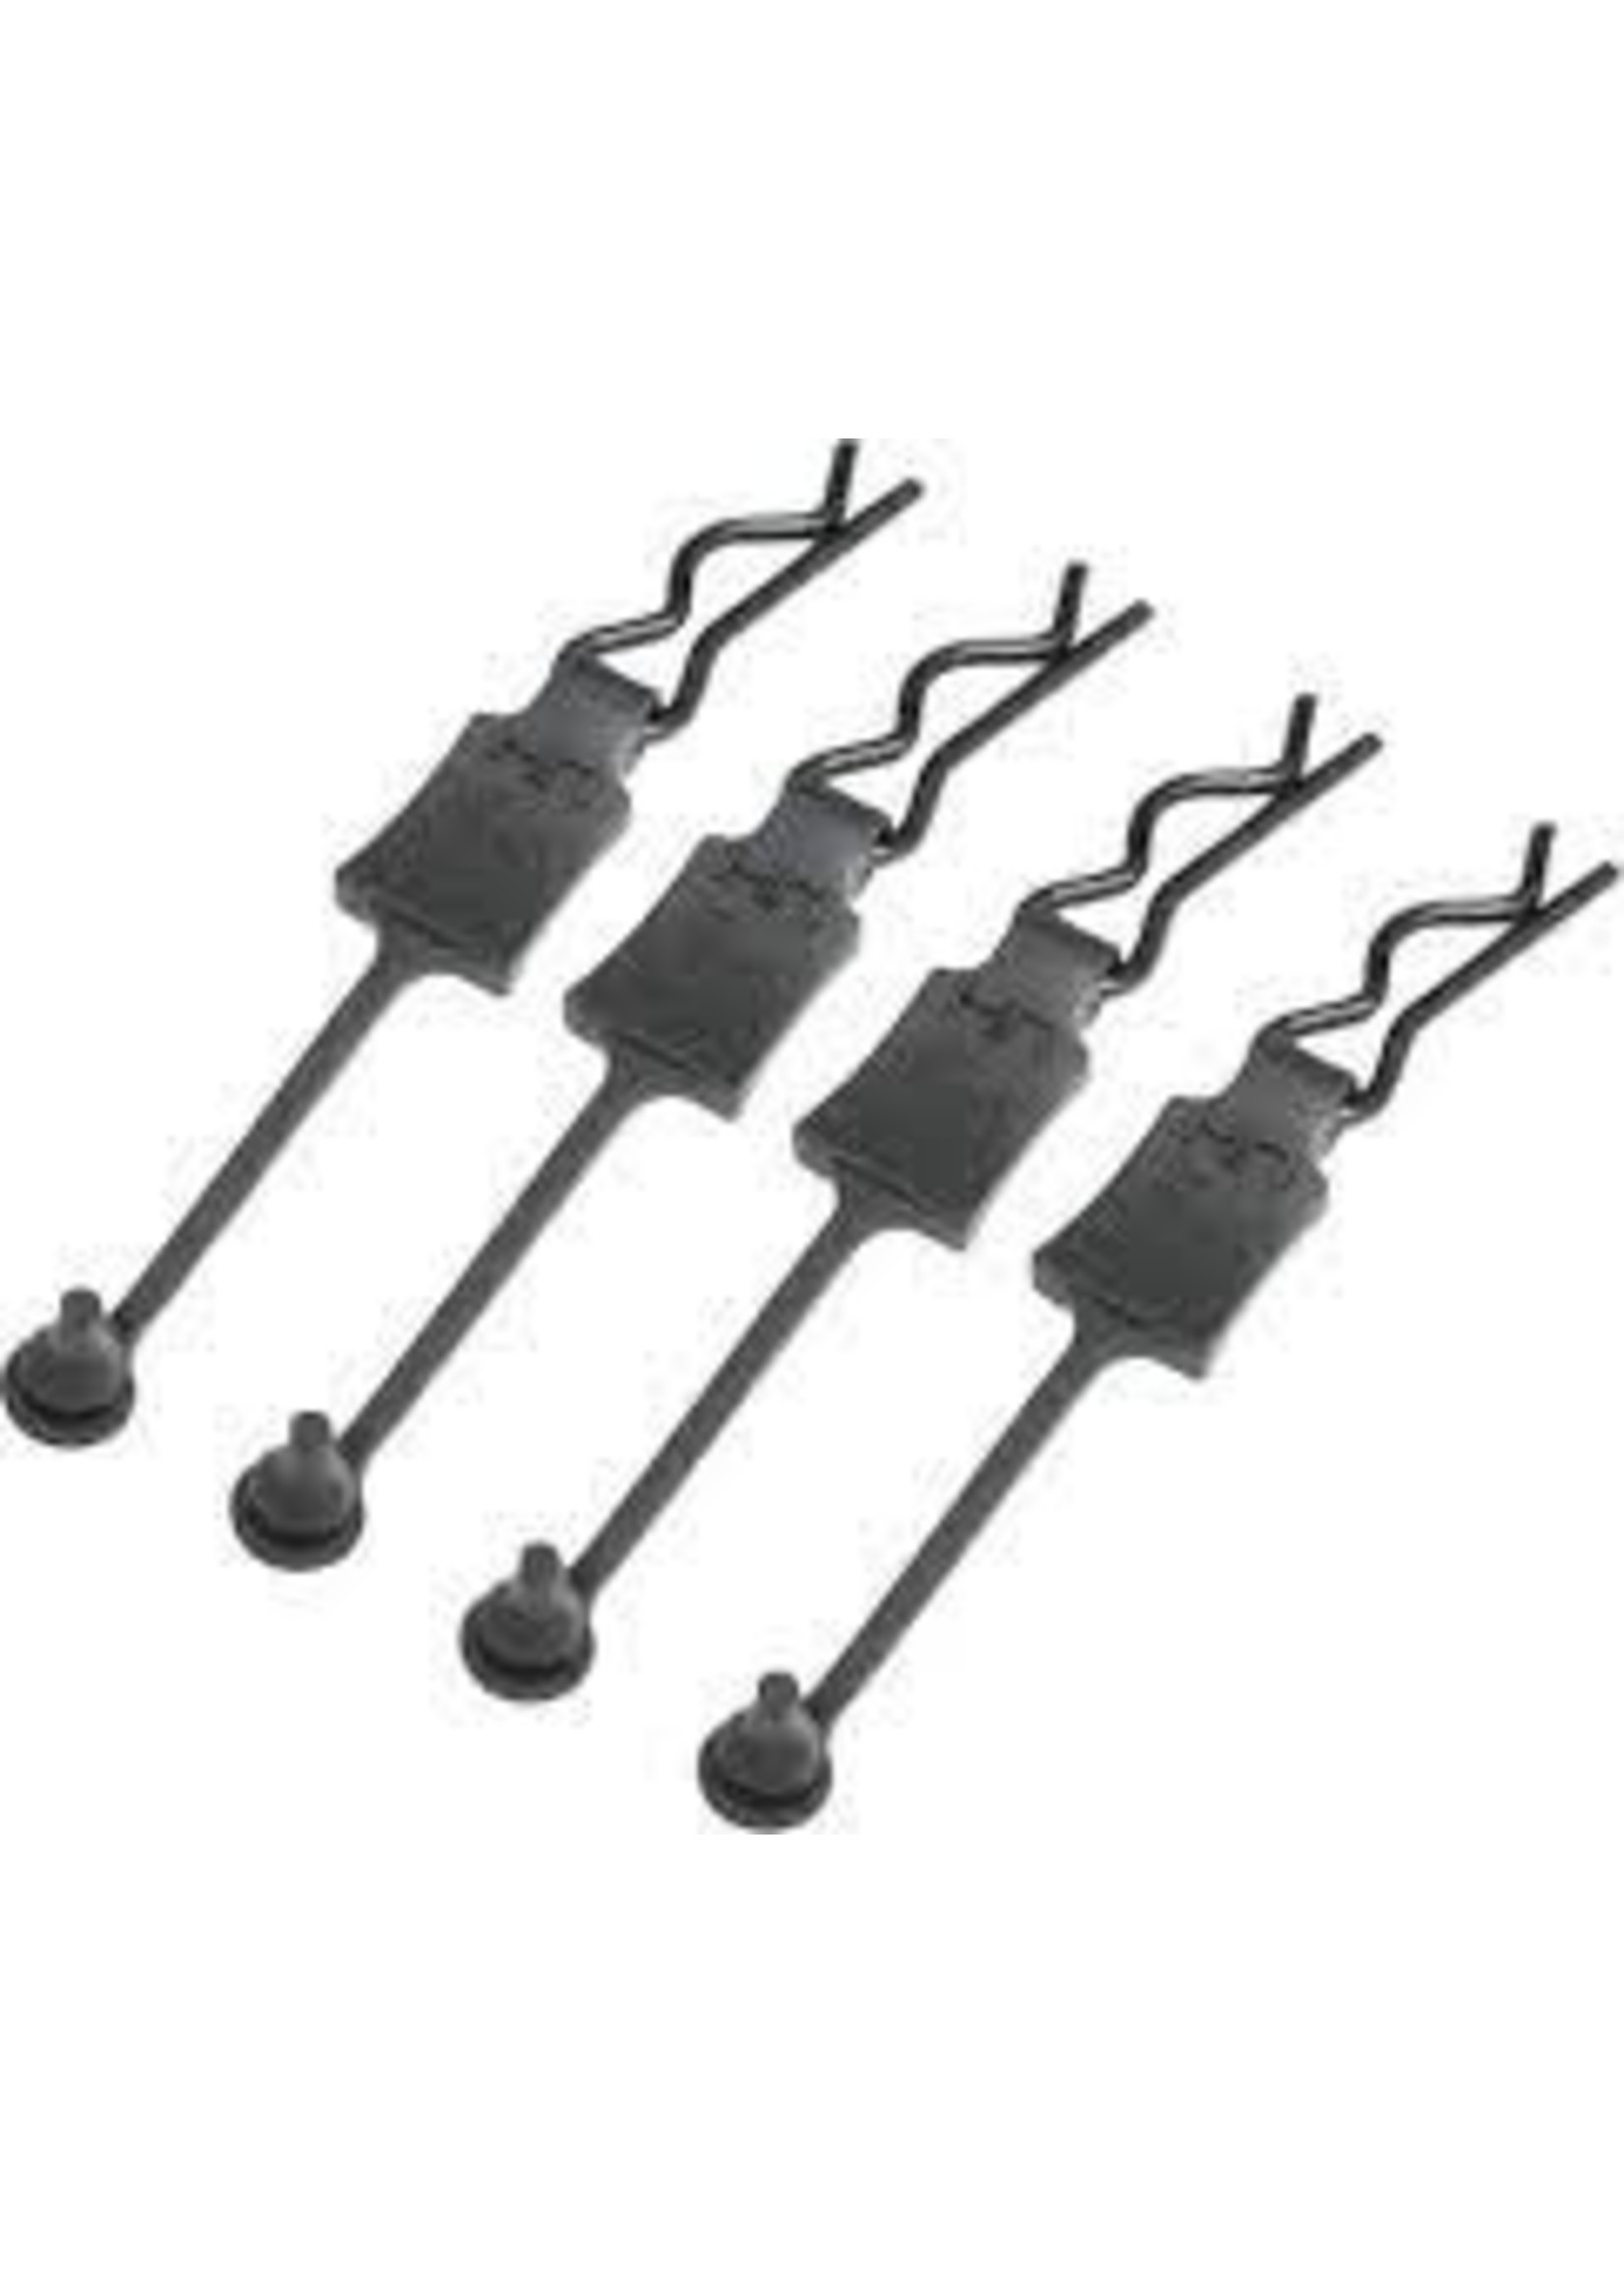 Hot Racing HRABWP39E01 Hot Racing 1/8 Body Clip Retainers (Black) (4)